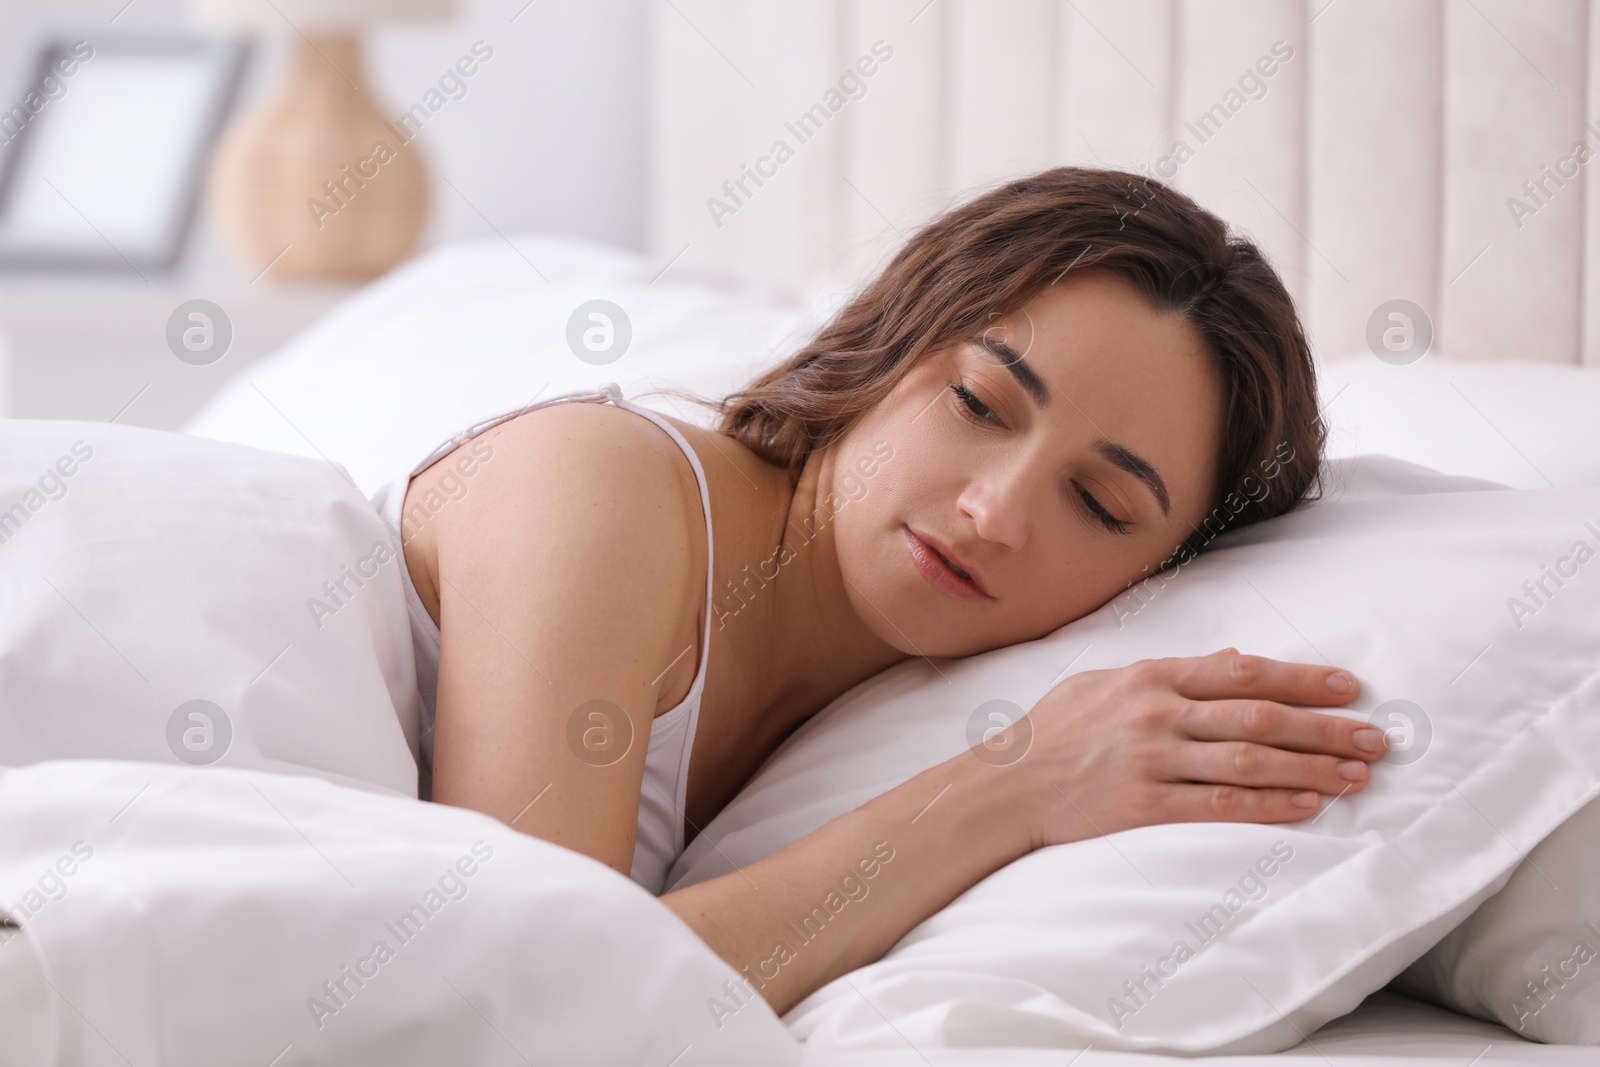 Photo of Bedtime. Beautiful woman lying in bed at home